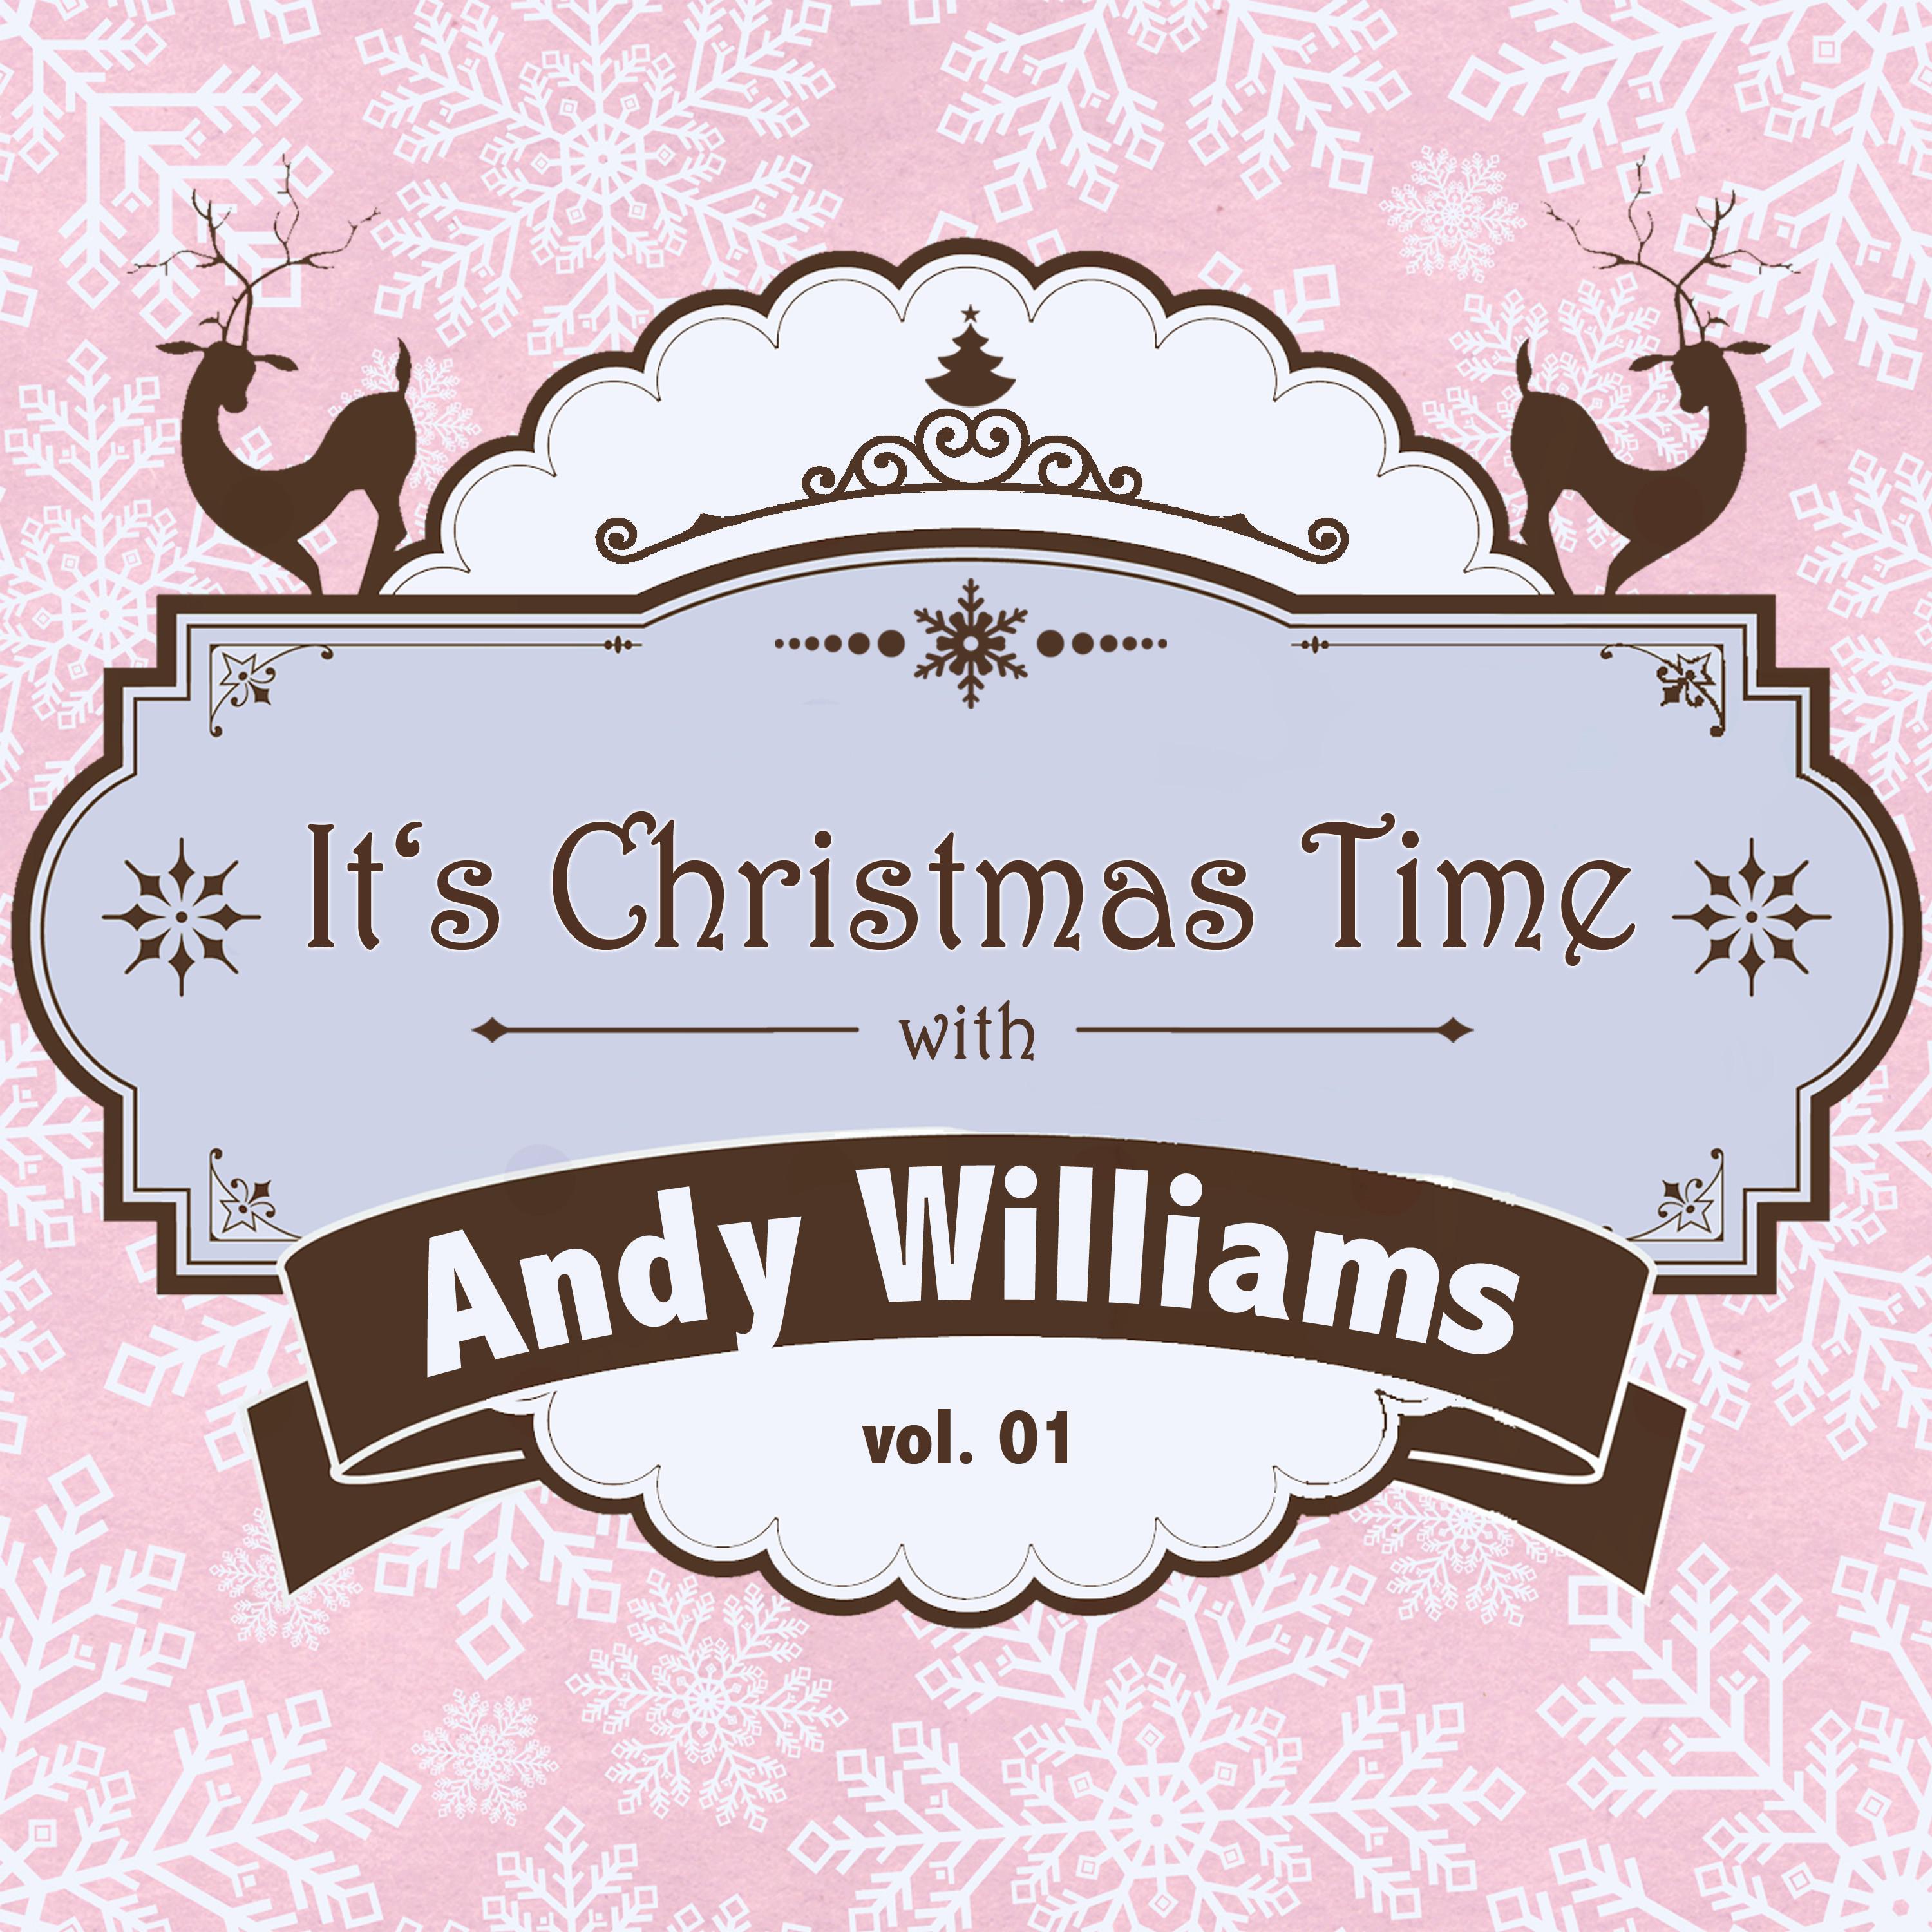 It's Christmas Time with Andy Williams, Vol. 01